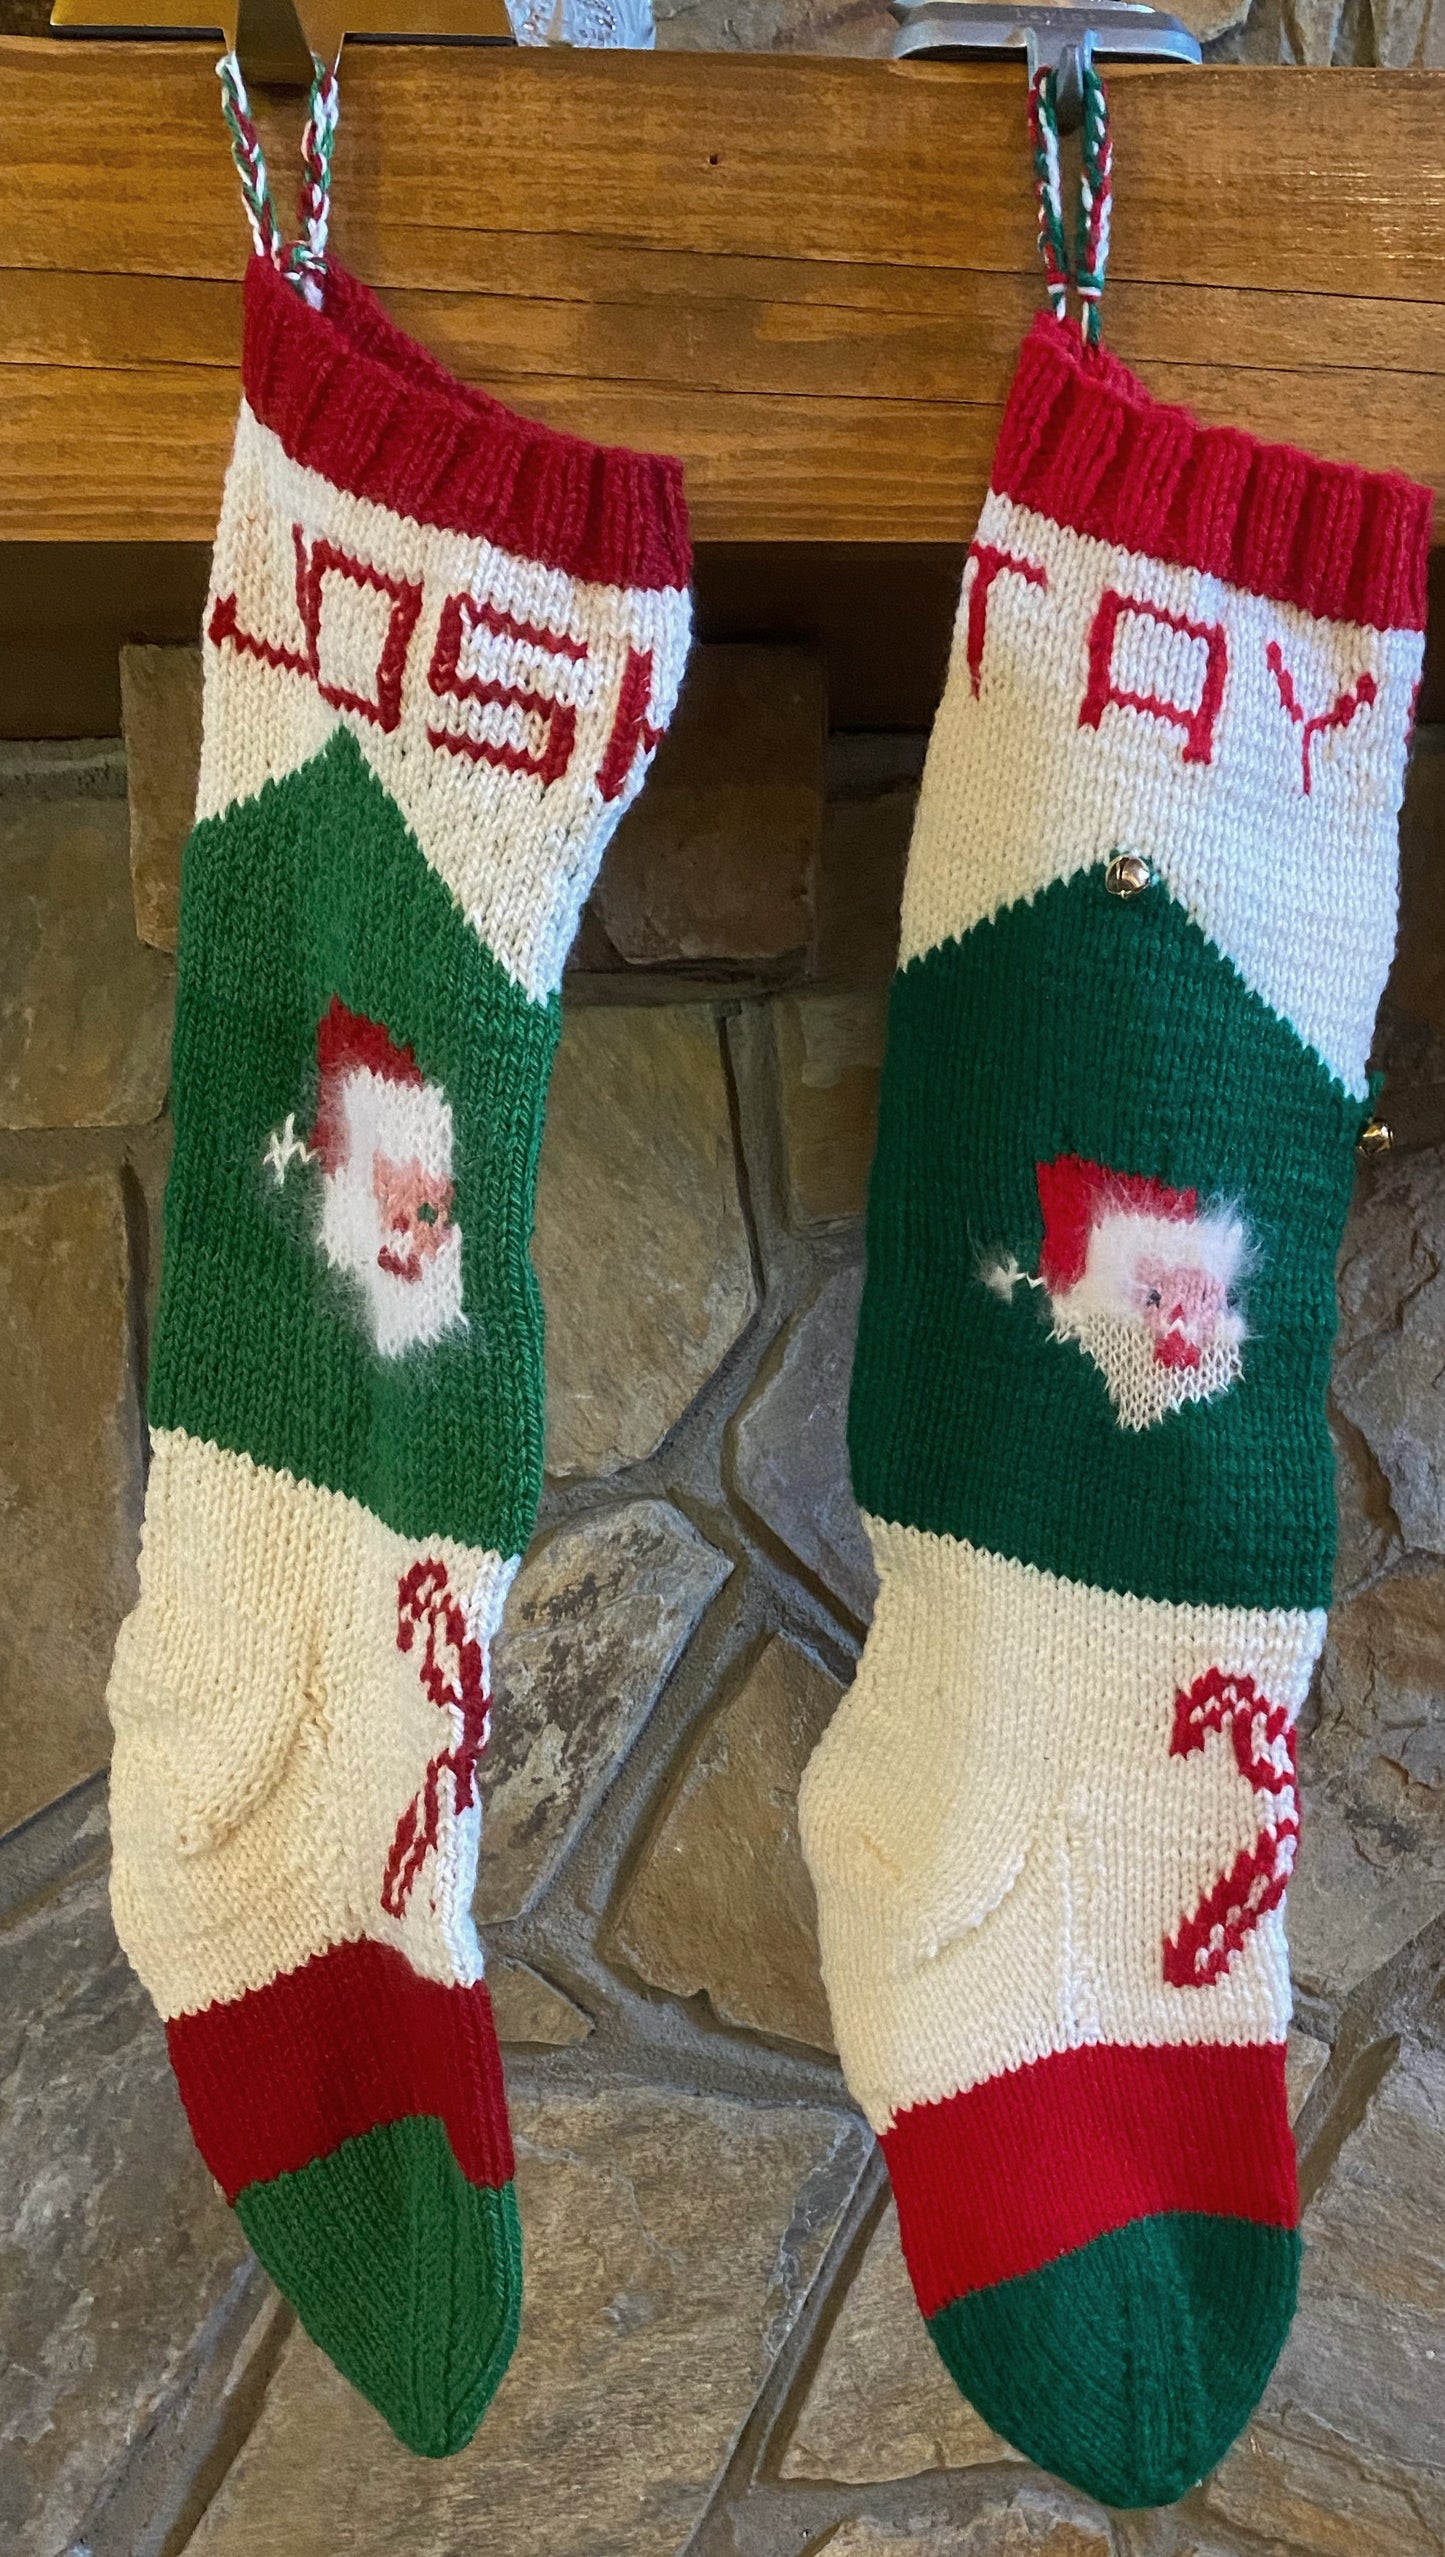 Recreating Traditional Stocking